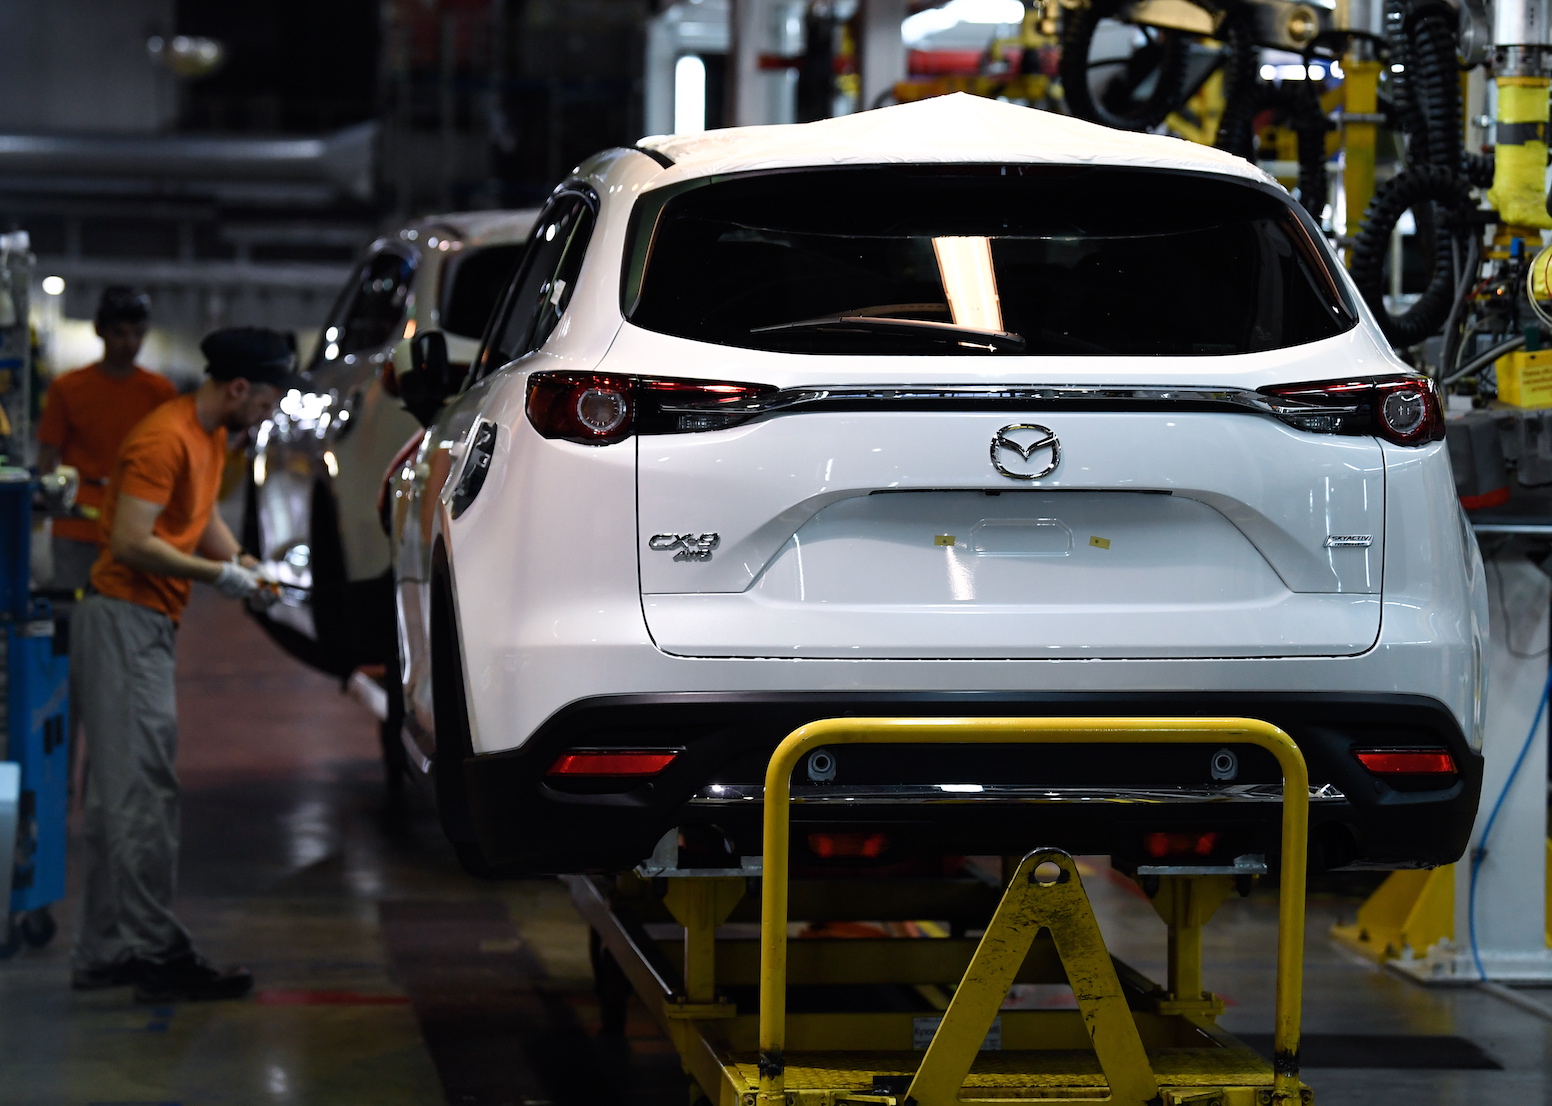 An assembly line of new Mazda CX-9 cars at Mazda Sollers Manufacturing Rus, a Russian-Japanese joint car assembly plant